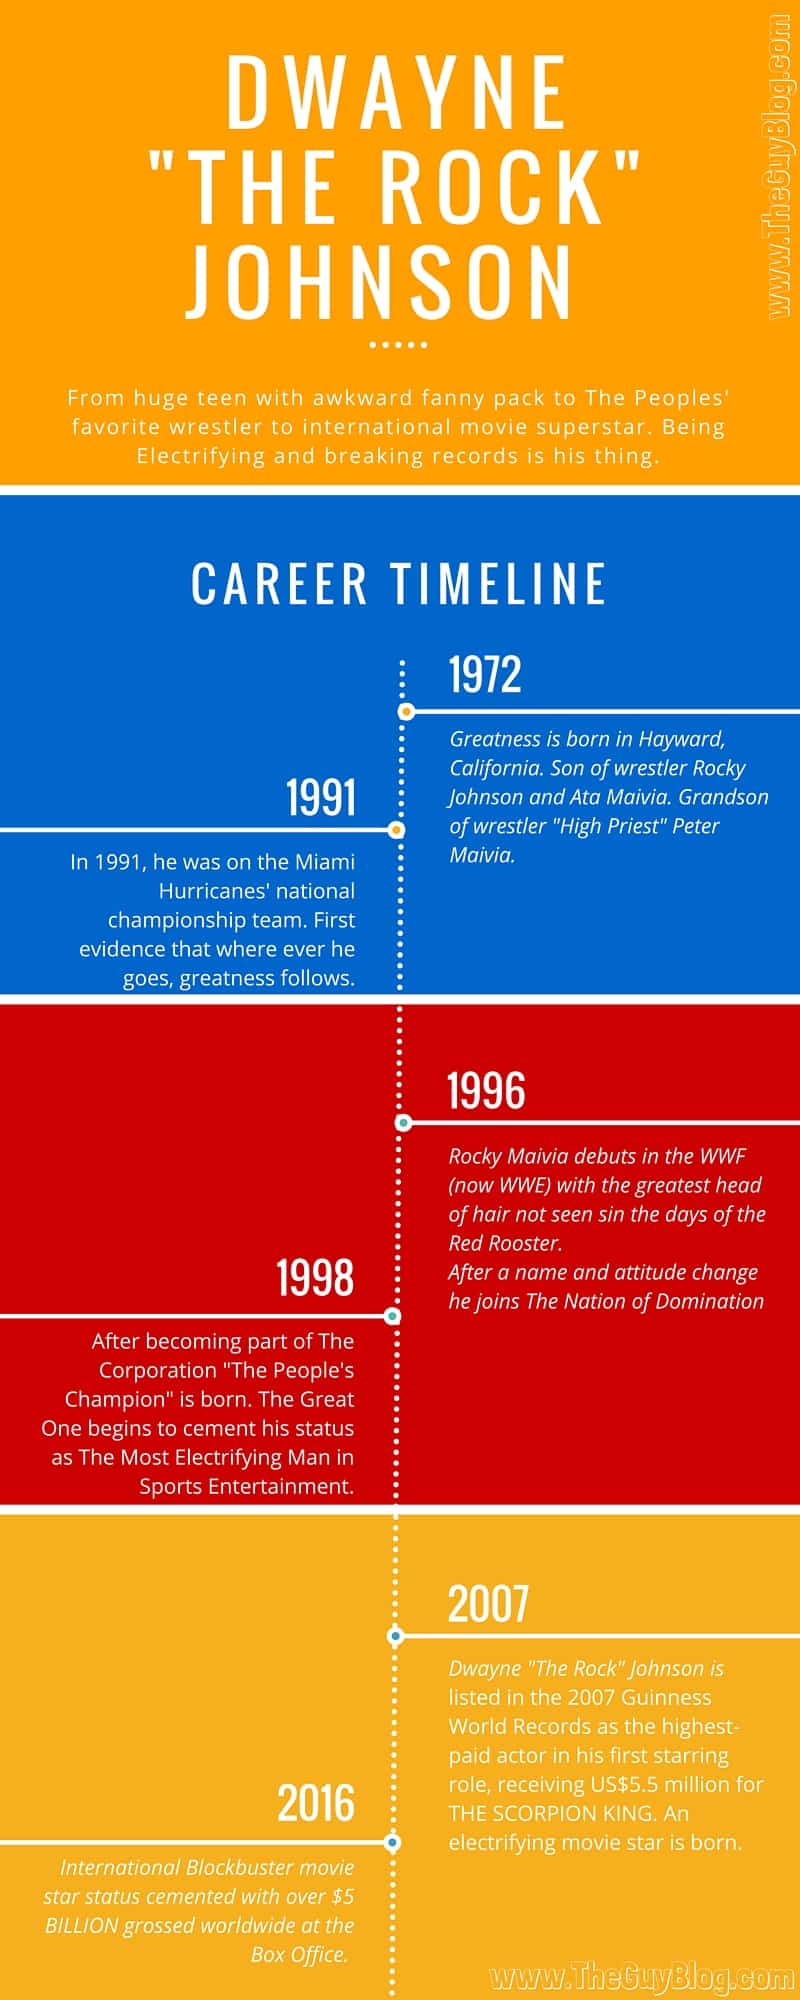 The Rock Career Timeline Infographic | The Guy Blog